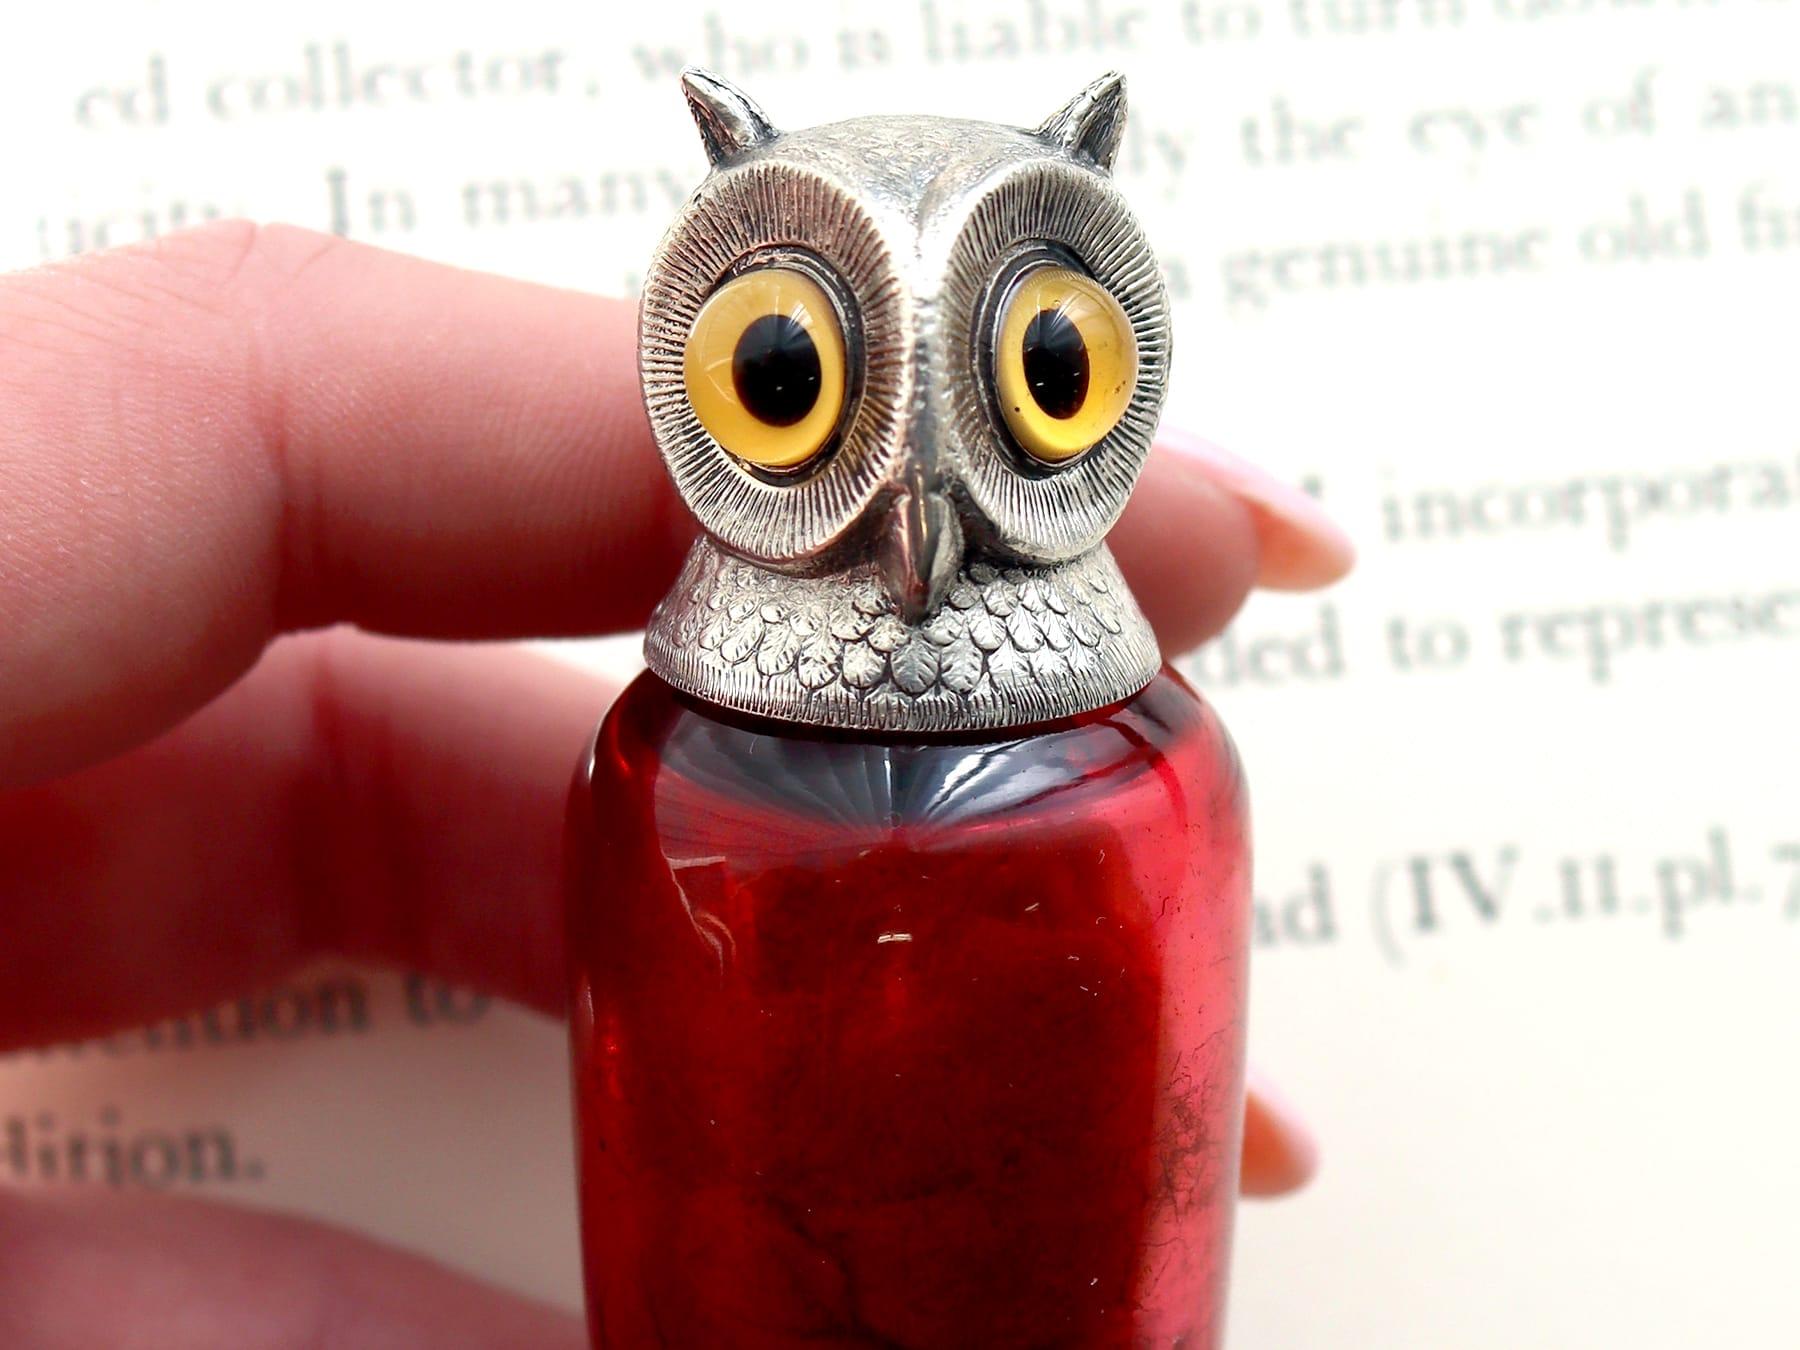 Antique Victorian Sterling Silver and Glass Owl Scent Bottle (1889) In Excellent Condition For Sale In Jesmond, Newcastle Upon Tyne